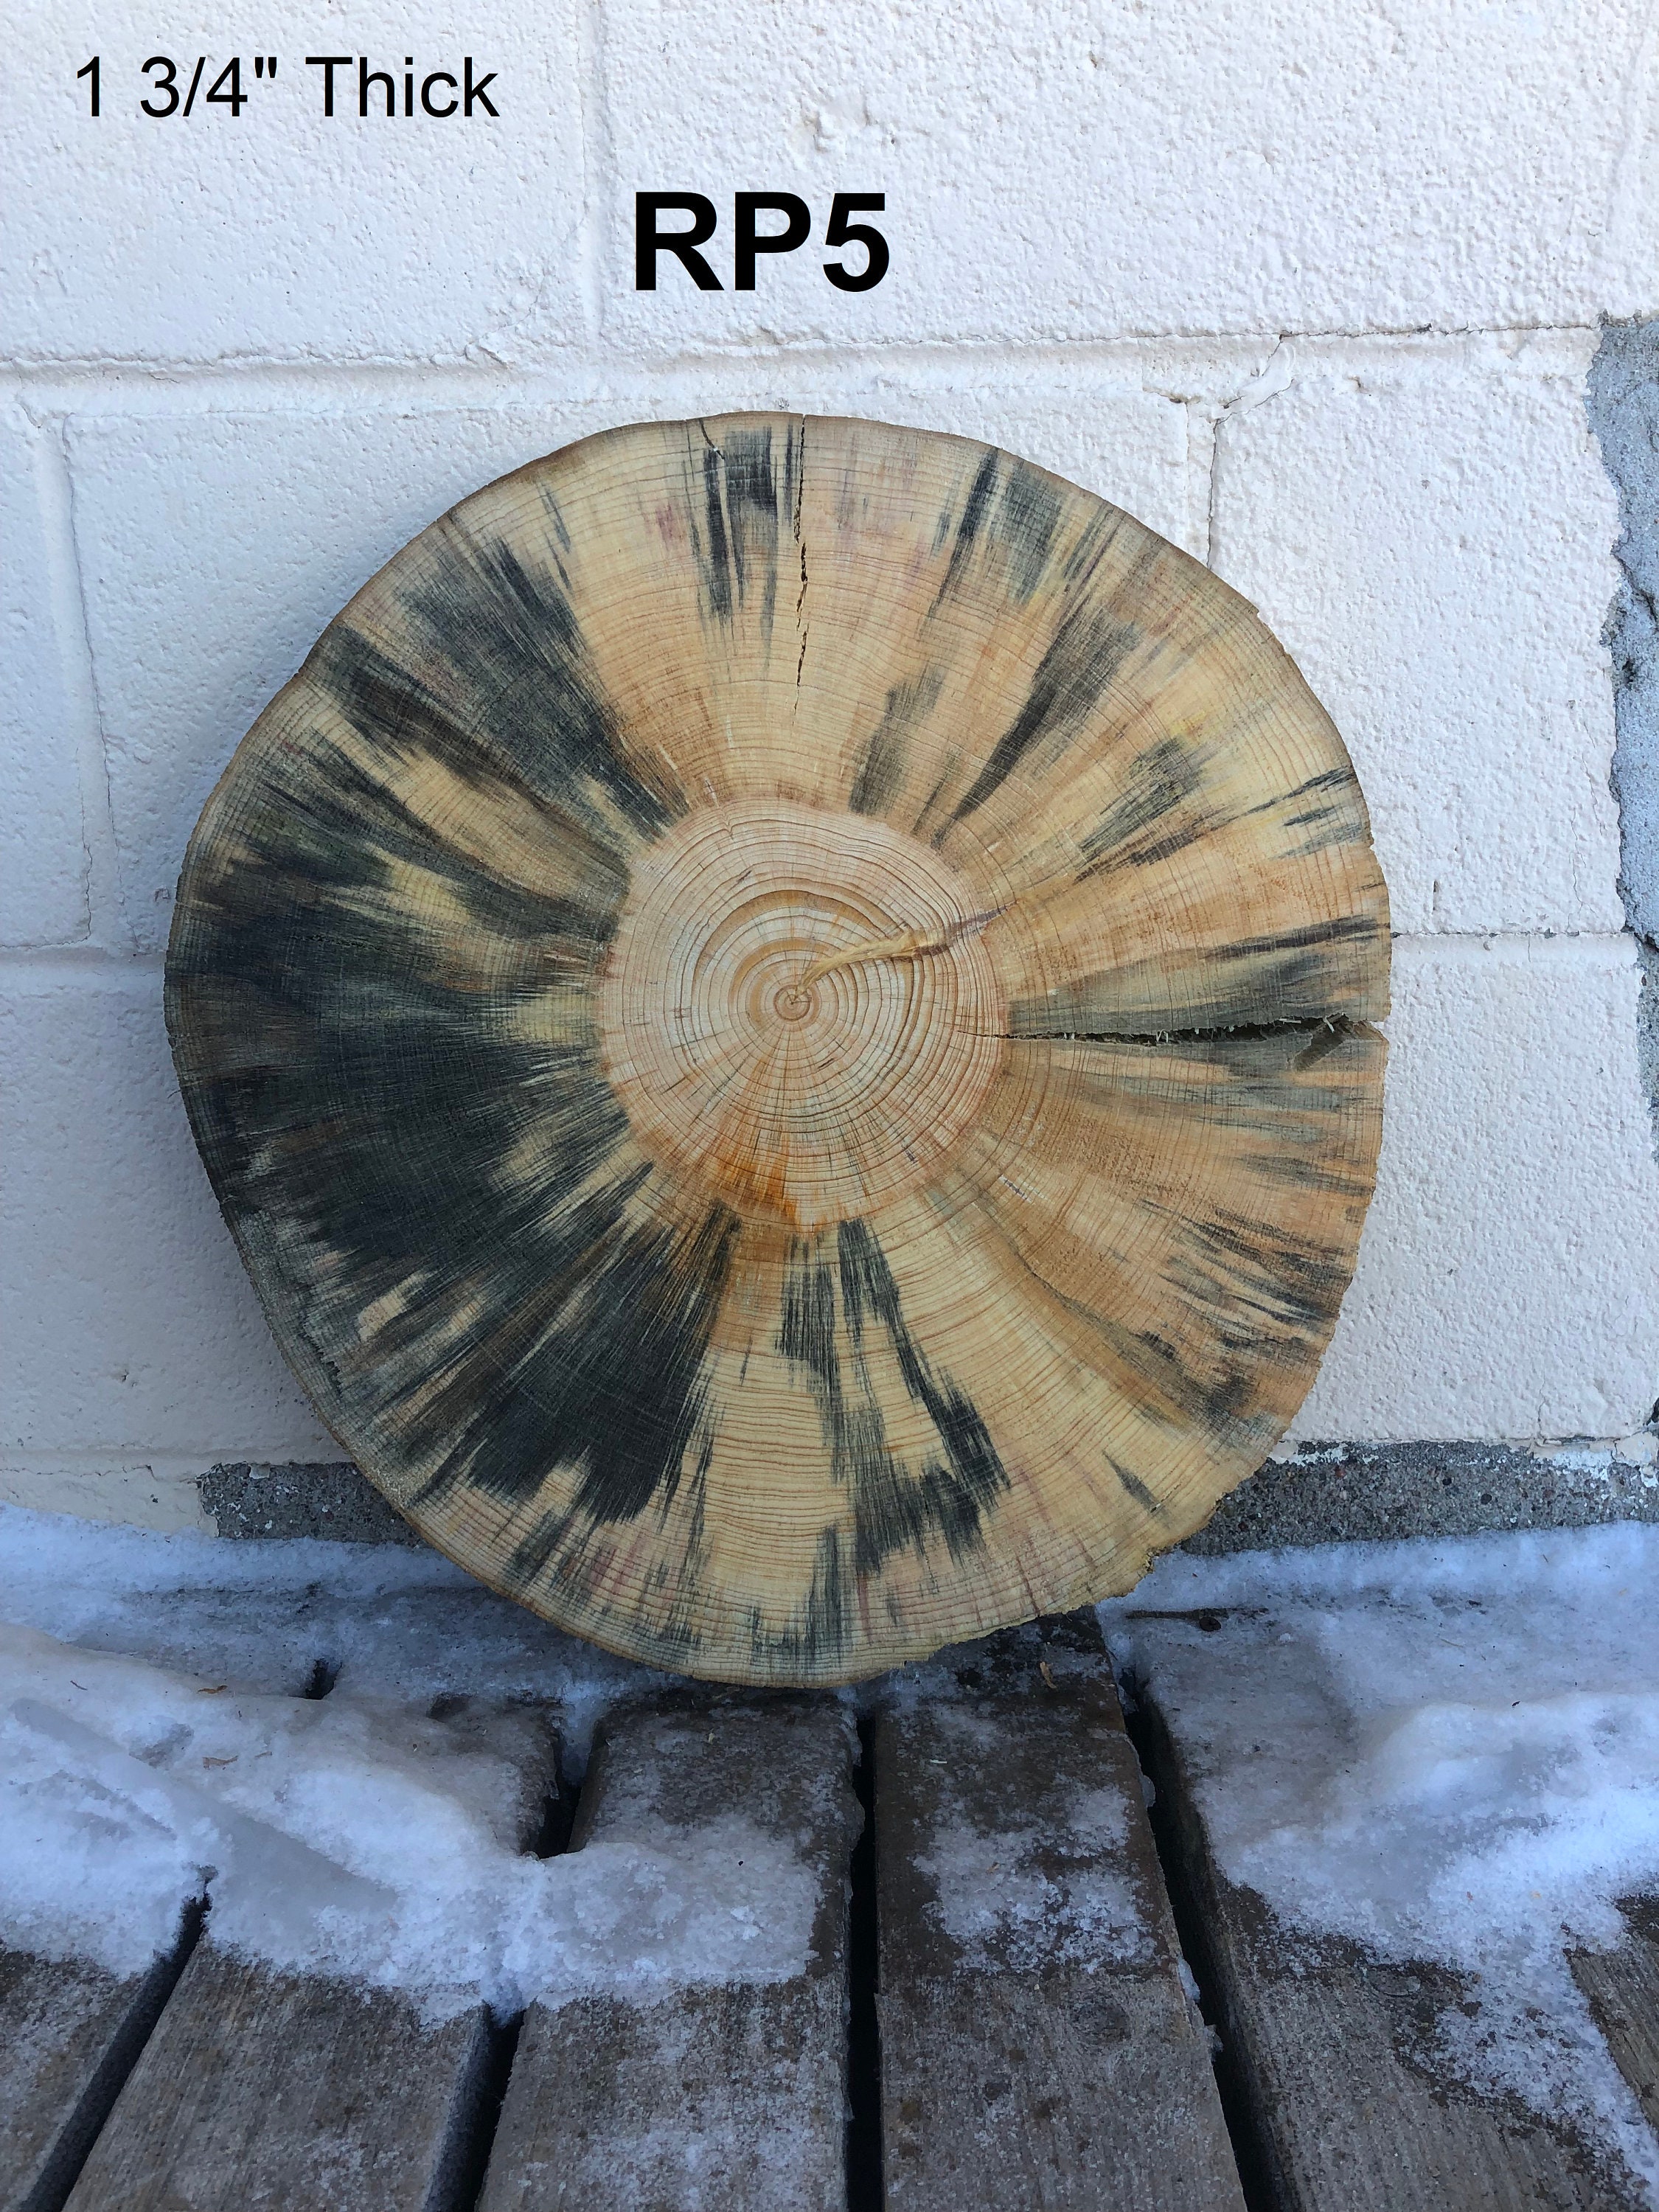 Set of 11-12 Inch Wood Slices for Rustic Wedding Centerpieces Natural Wood  Slices, Log Slices, Tree Slices, Wood Cuts, Wood Stump Slices 